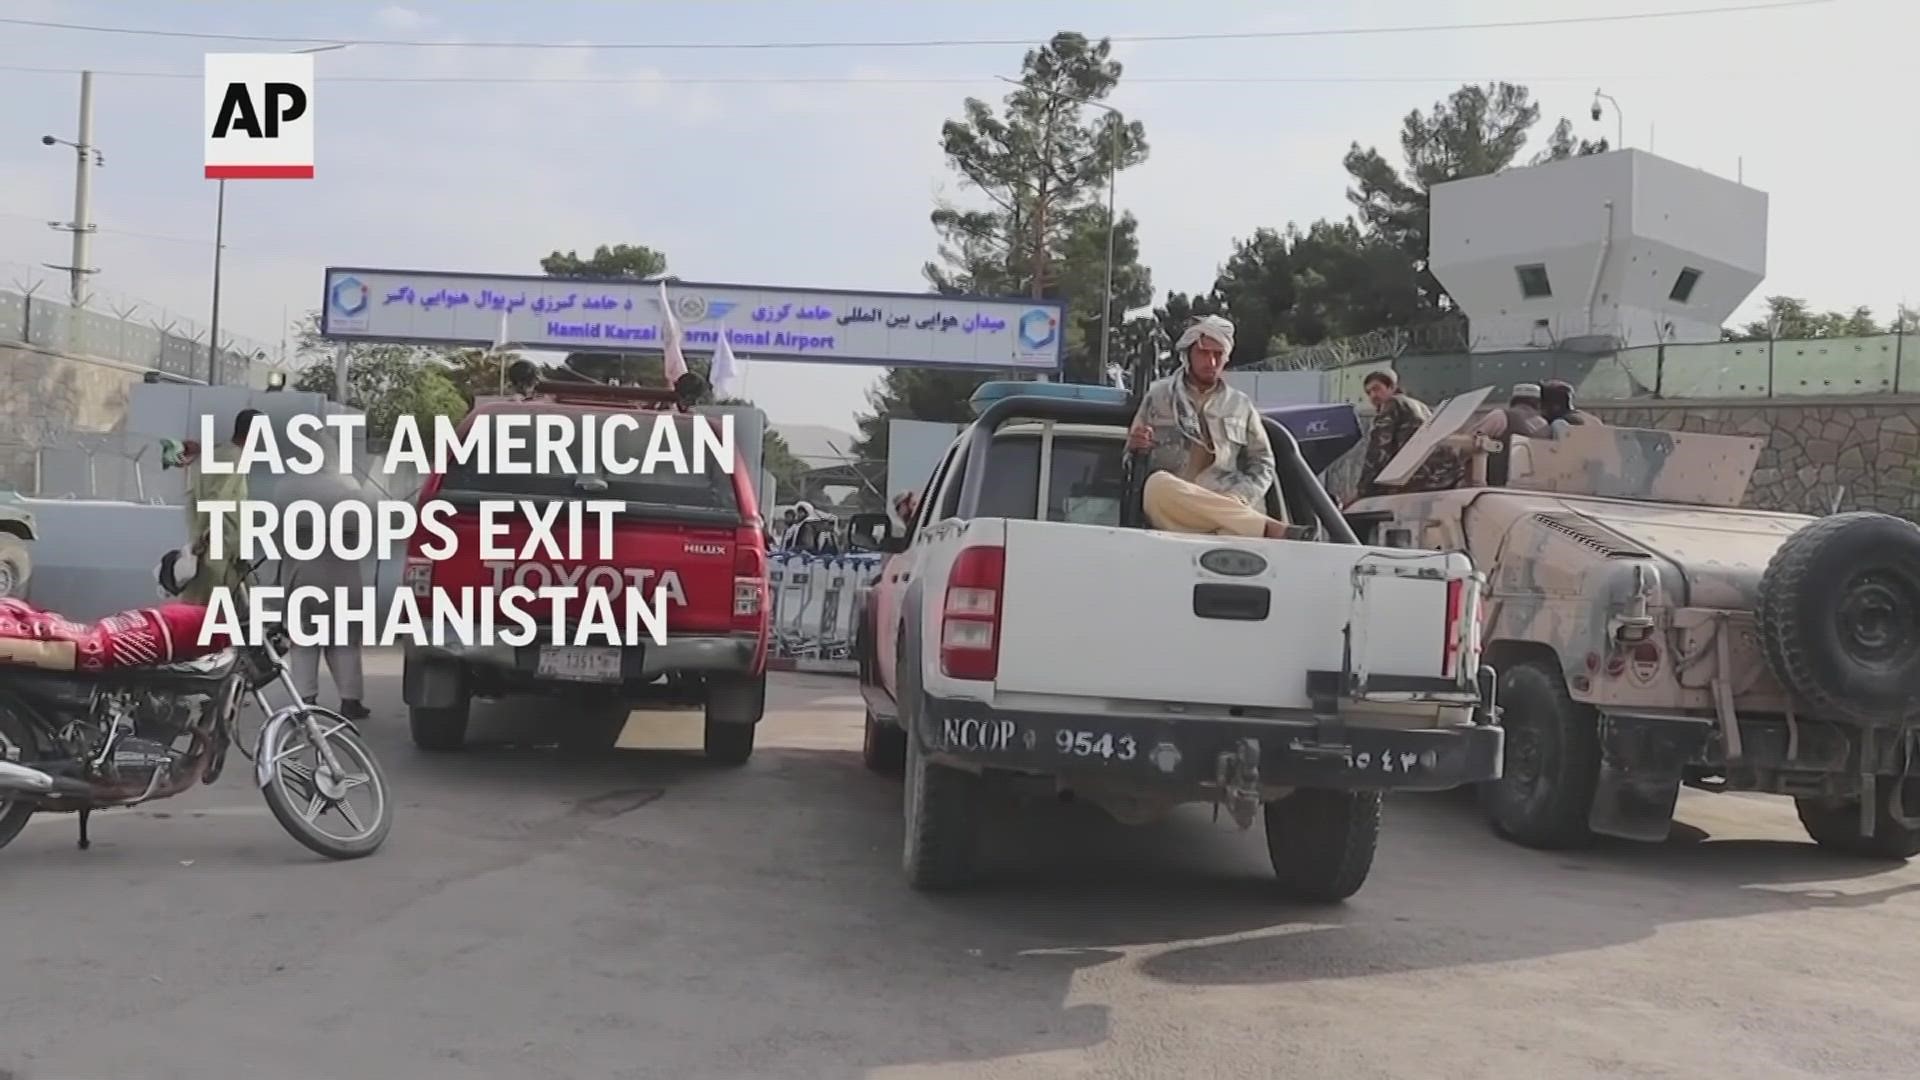 The United States completed its withdrawal from Afghanistan late Monday, ending America's longest war and closing a chapter in military history.